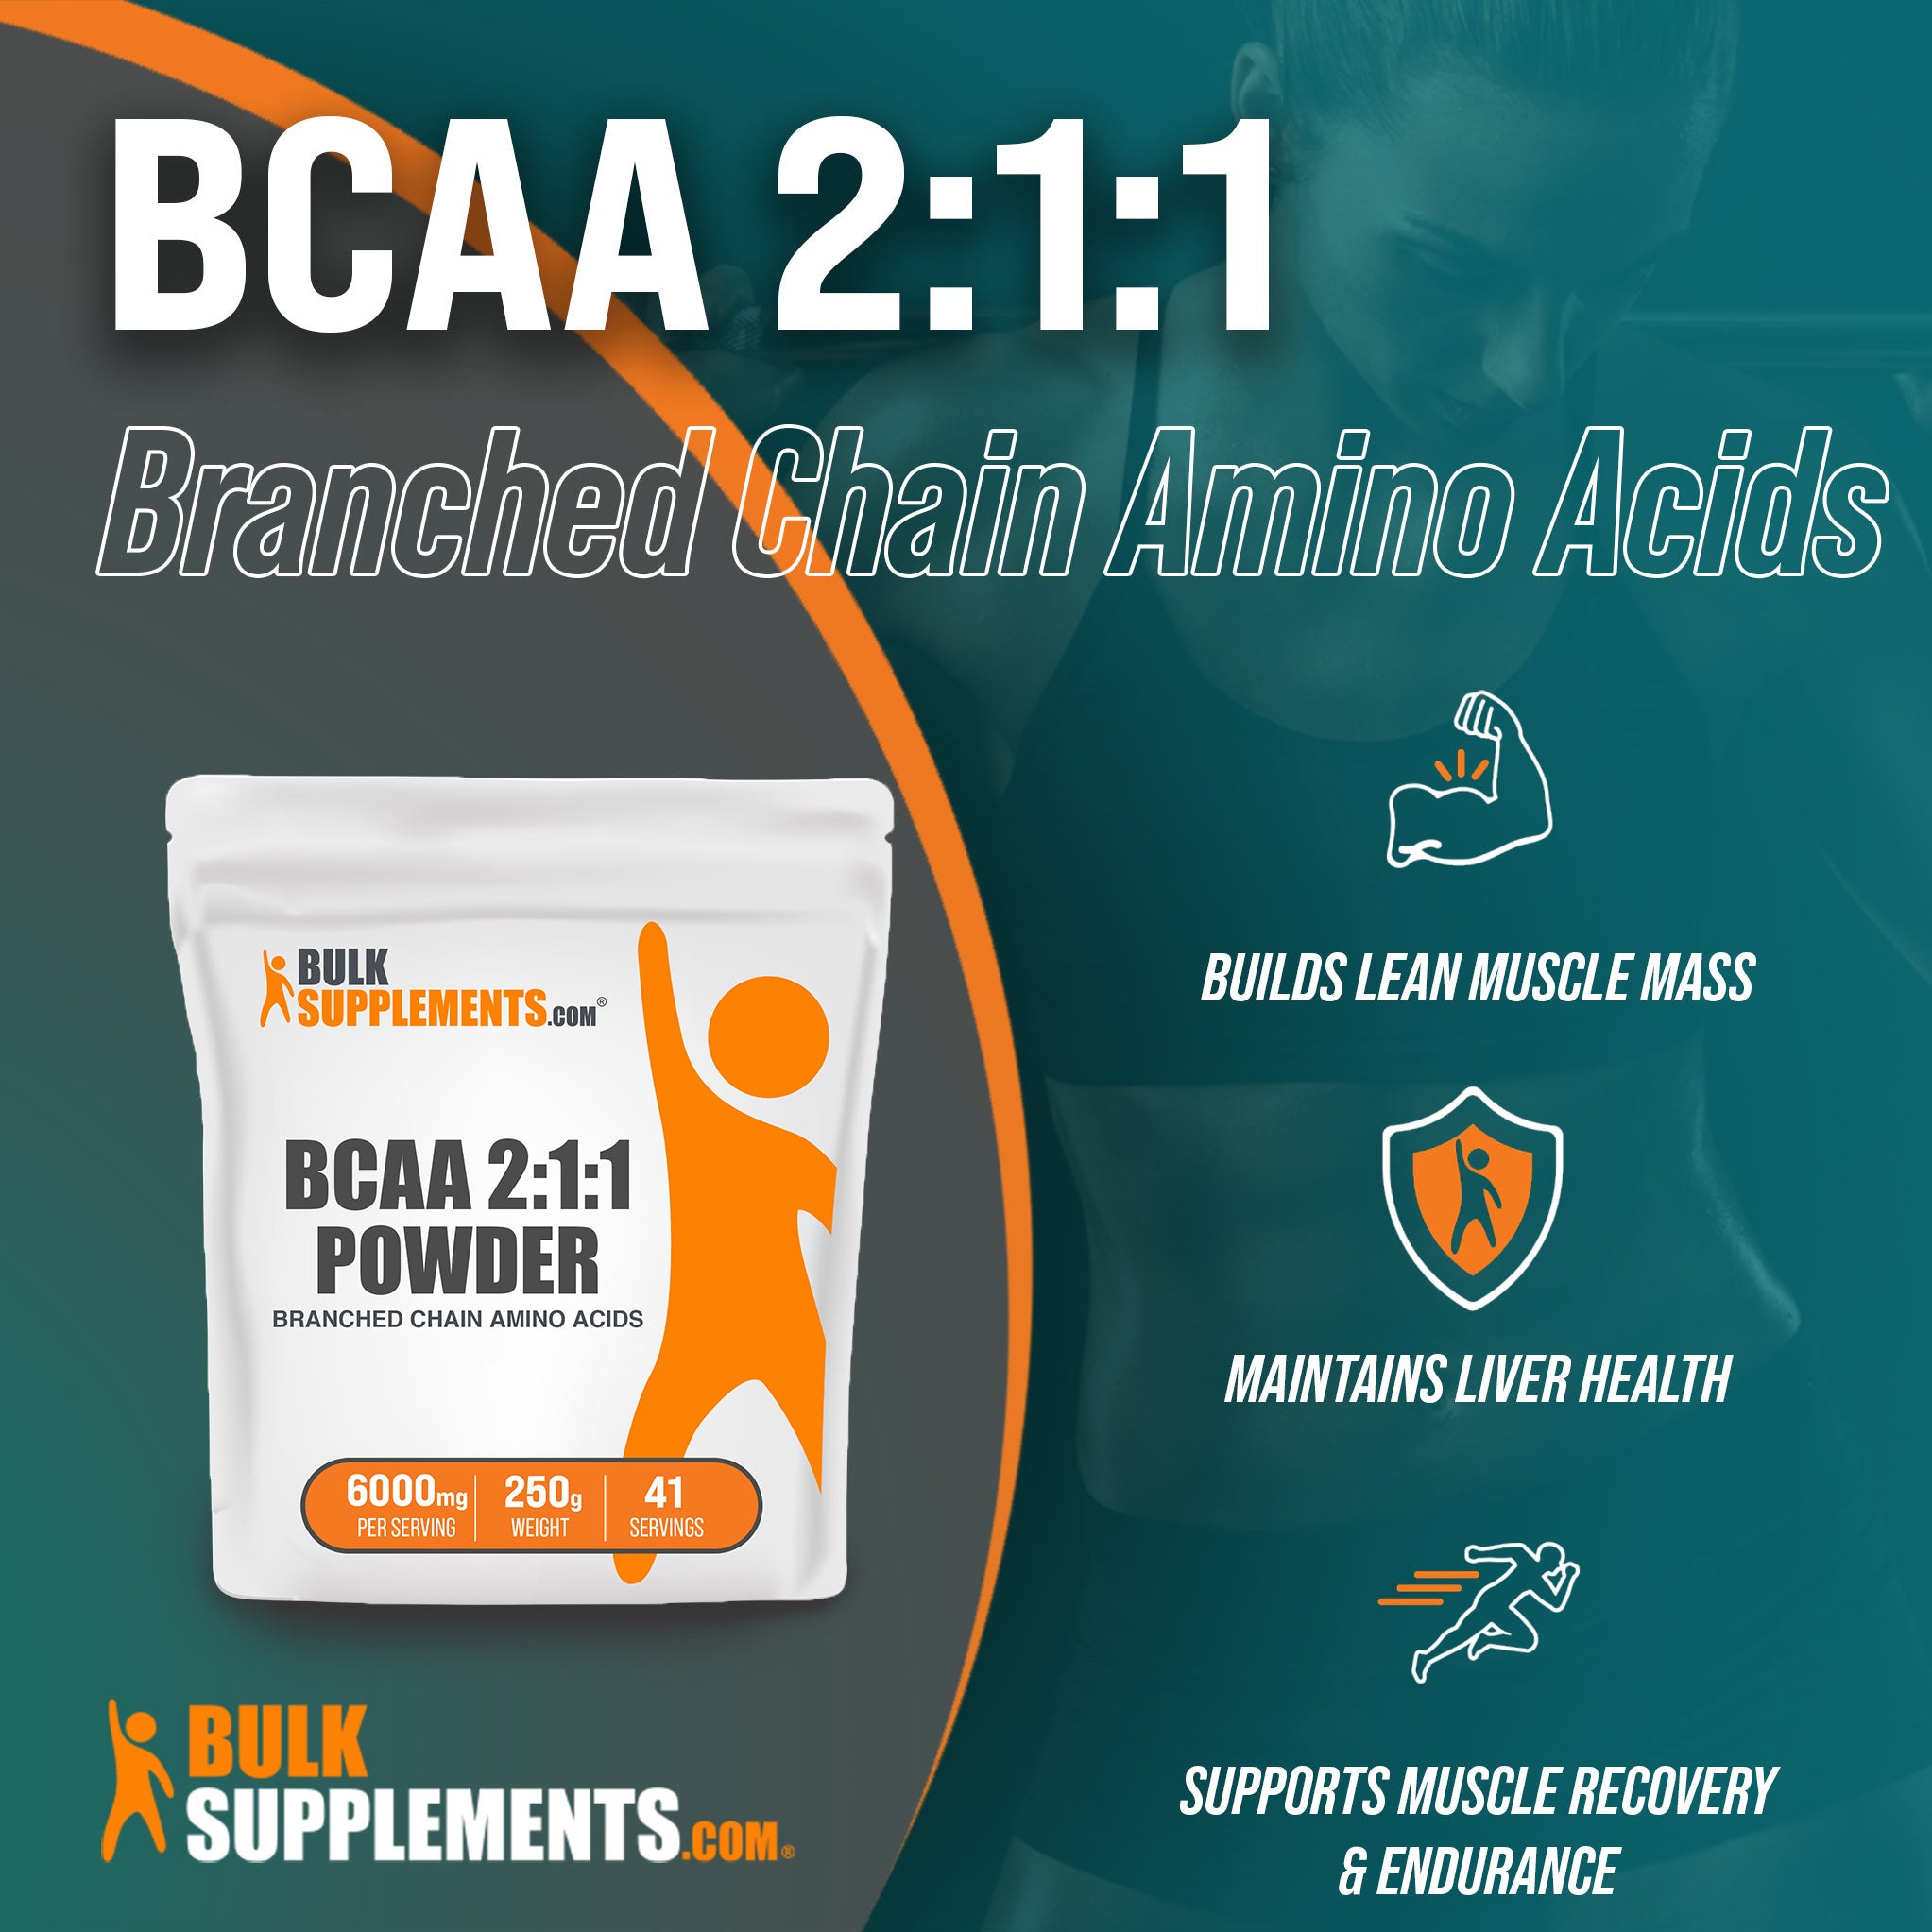 BCAA Powder from Bulk Supplements for building lean muscle mass and endurance